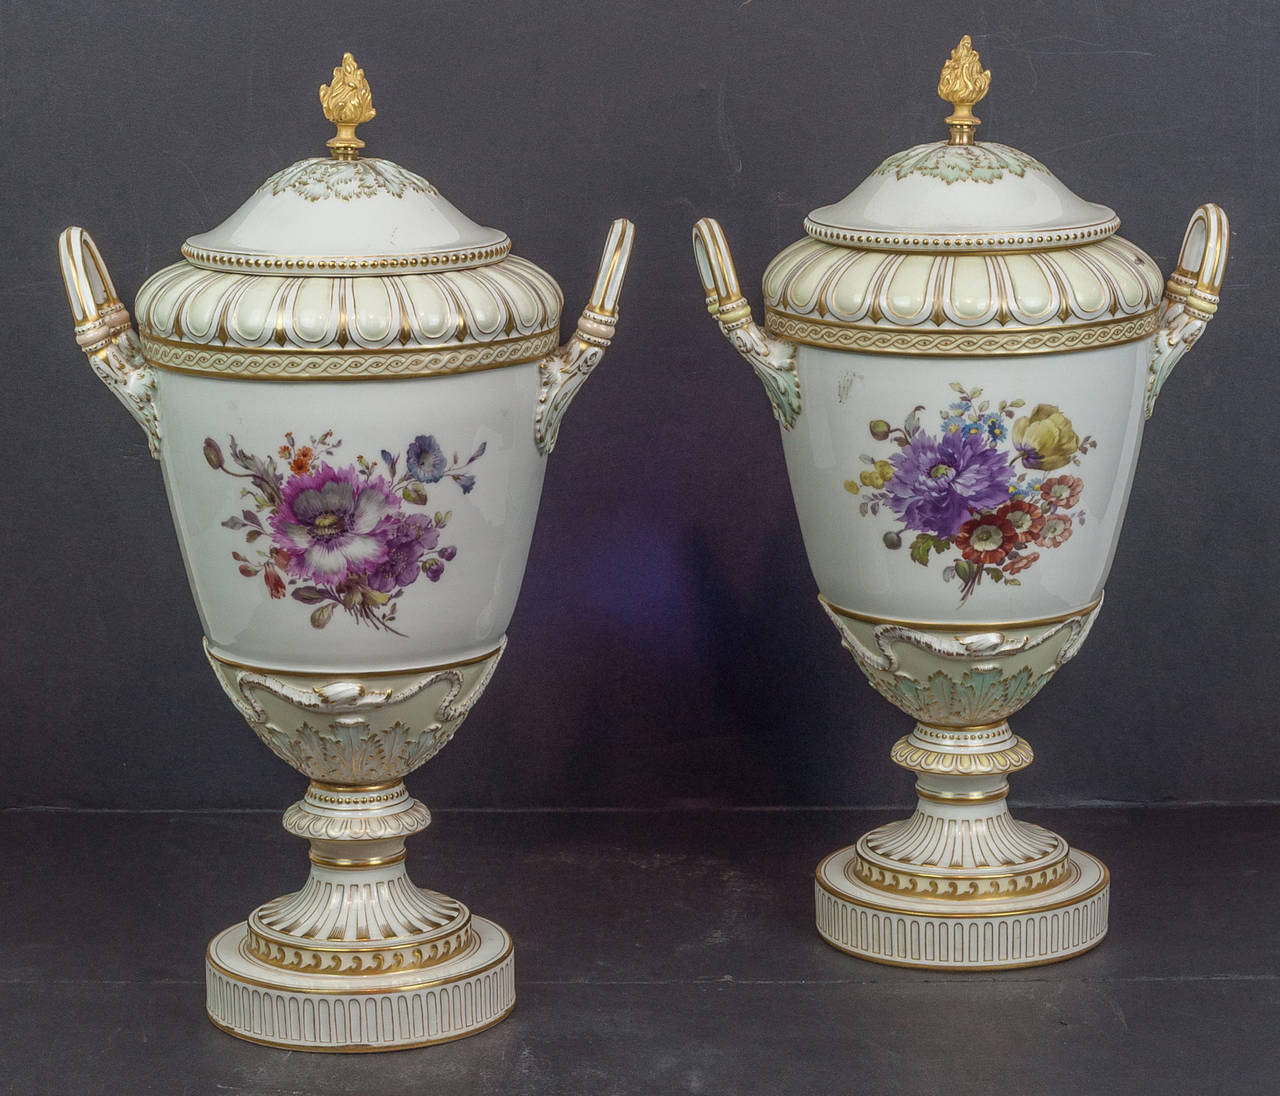 German Pair of KPM Porcelain Covered Urns with Painted Love Scenes